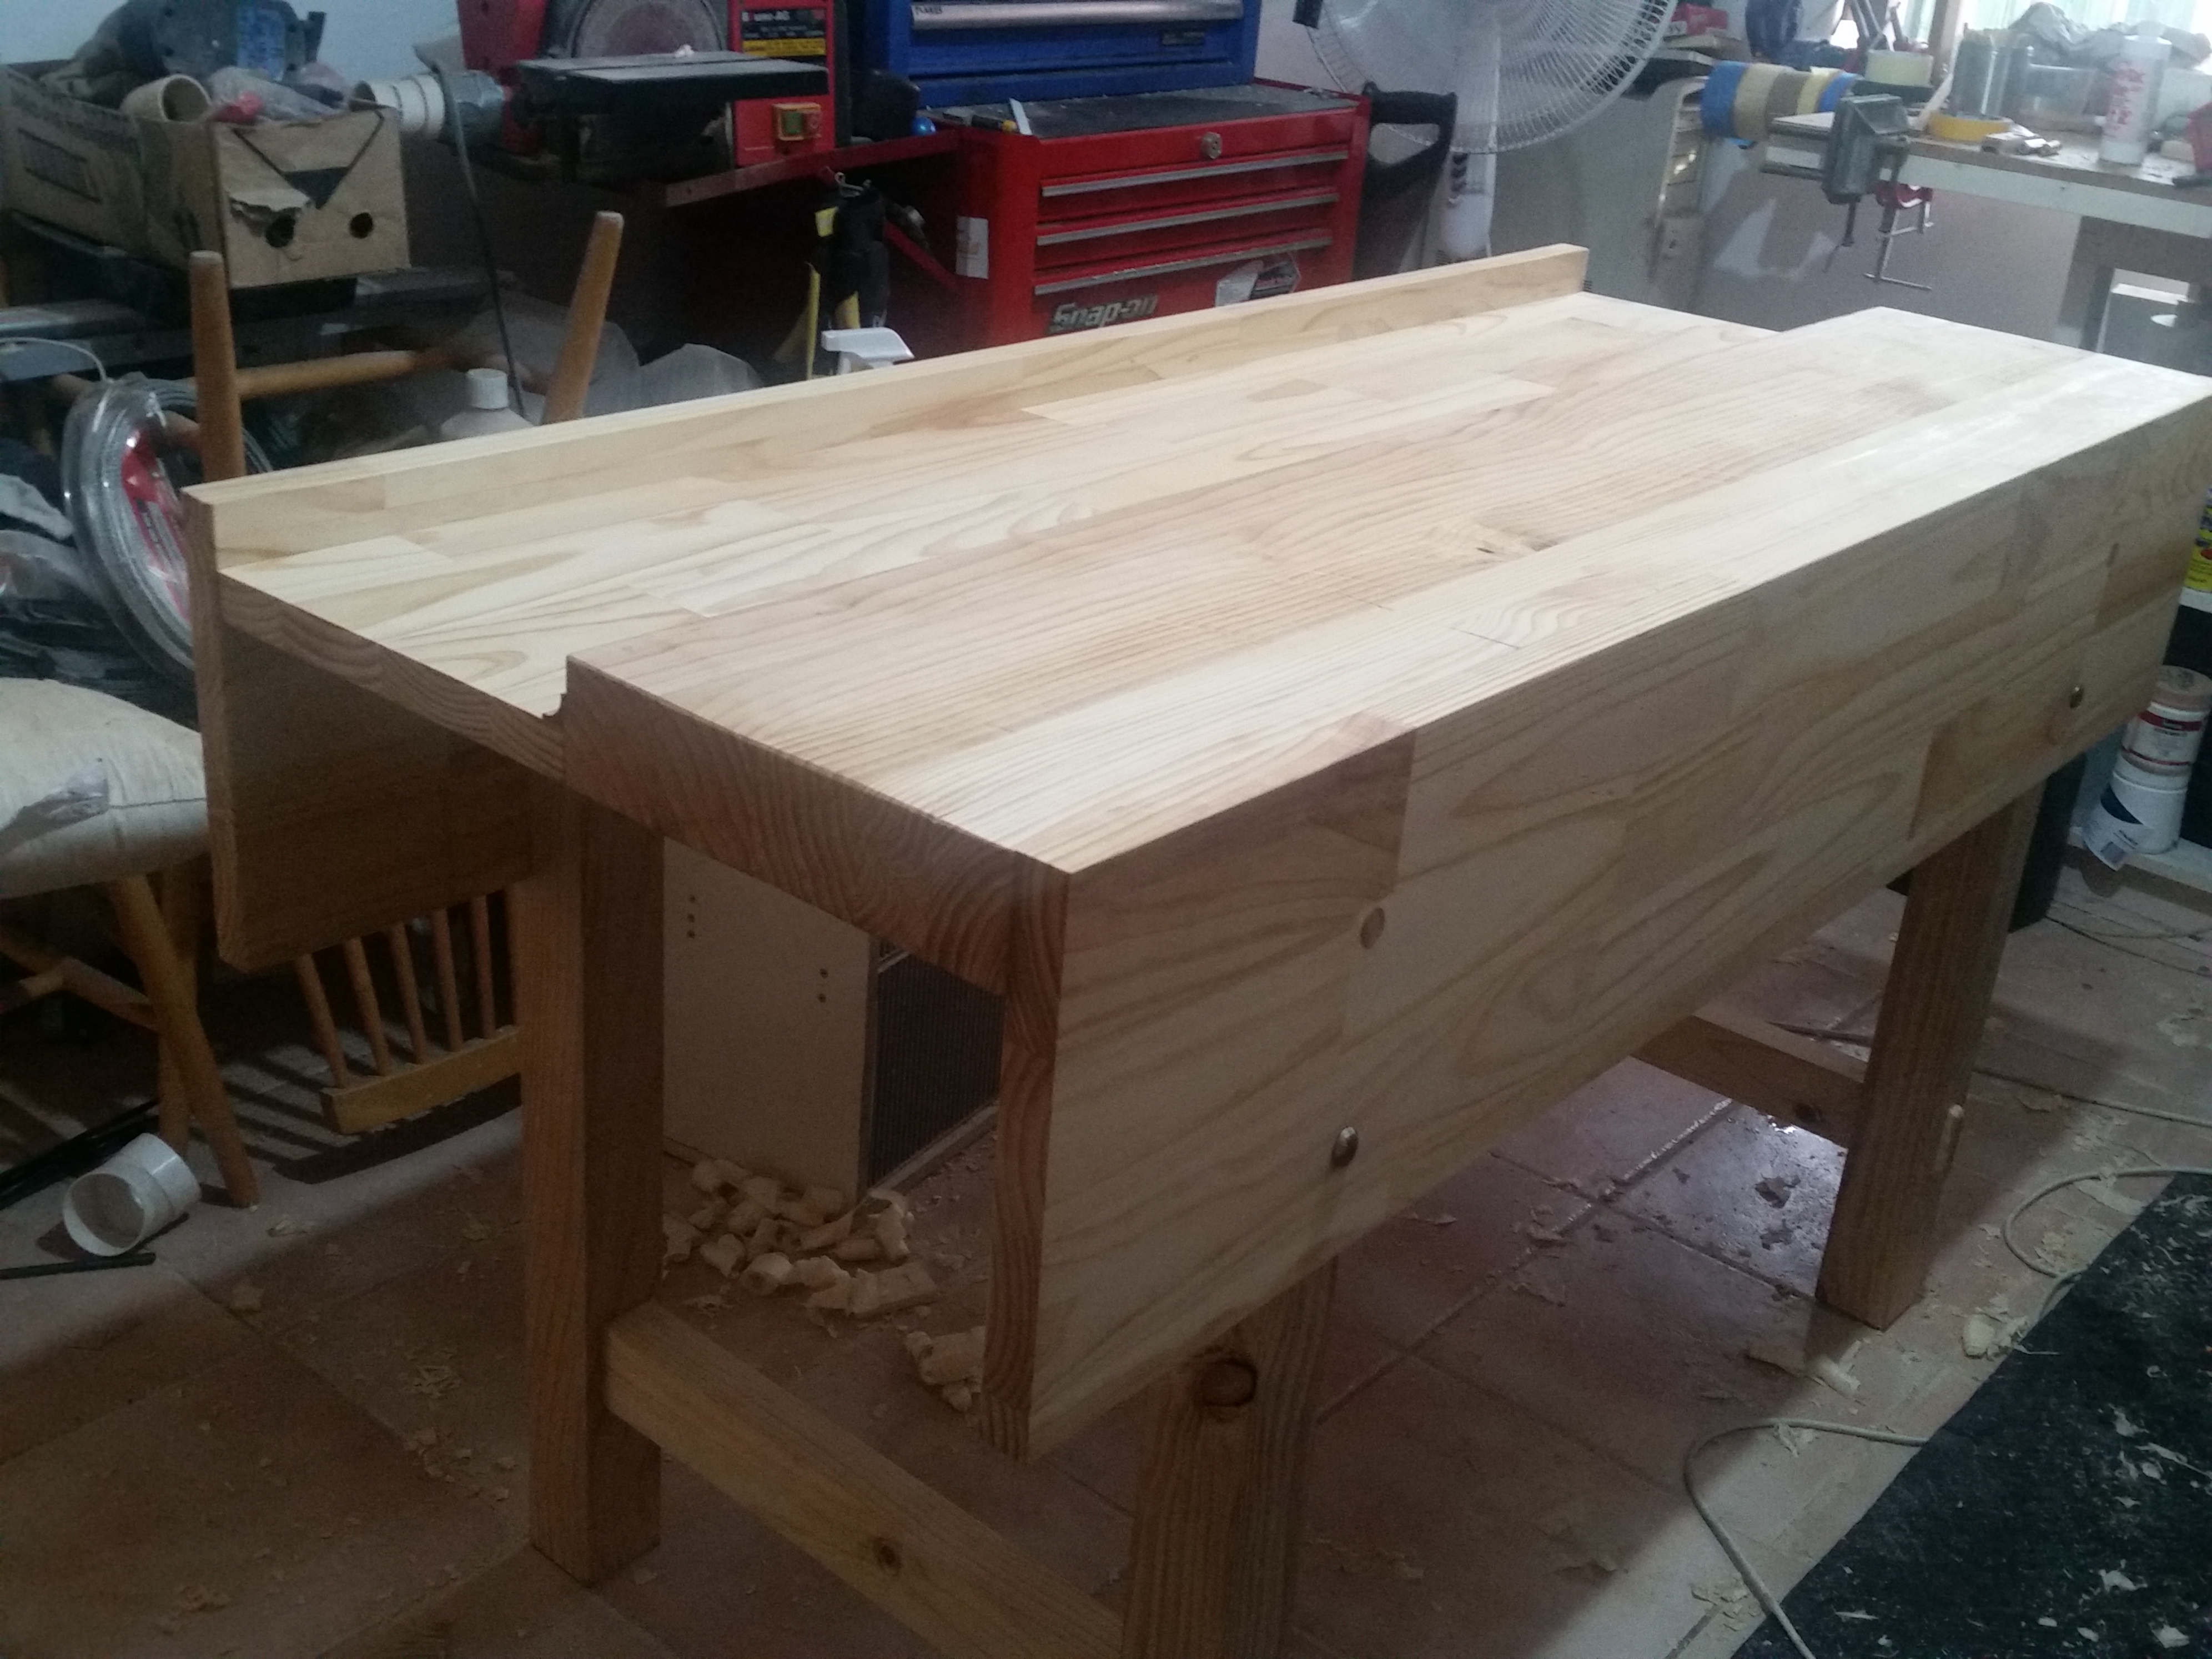 Workbench by Shed